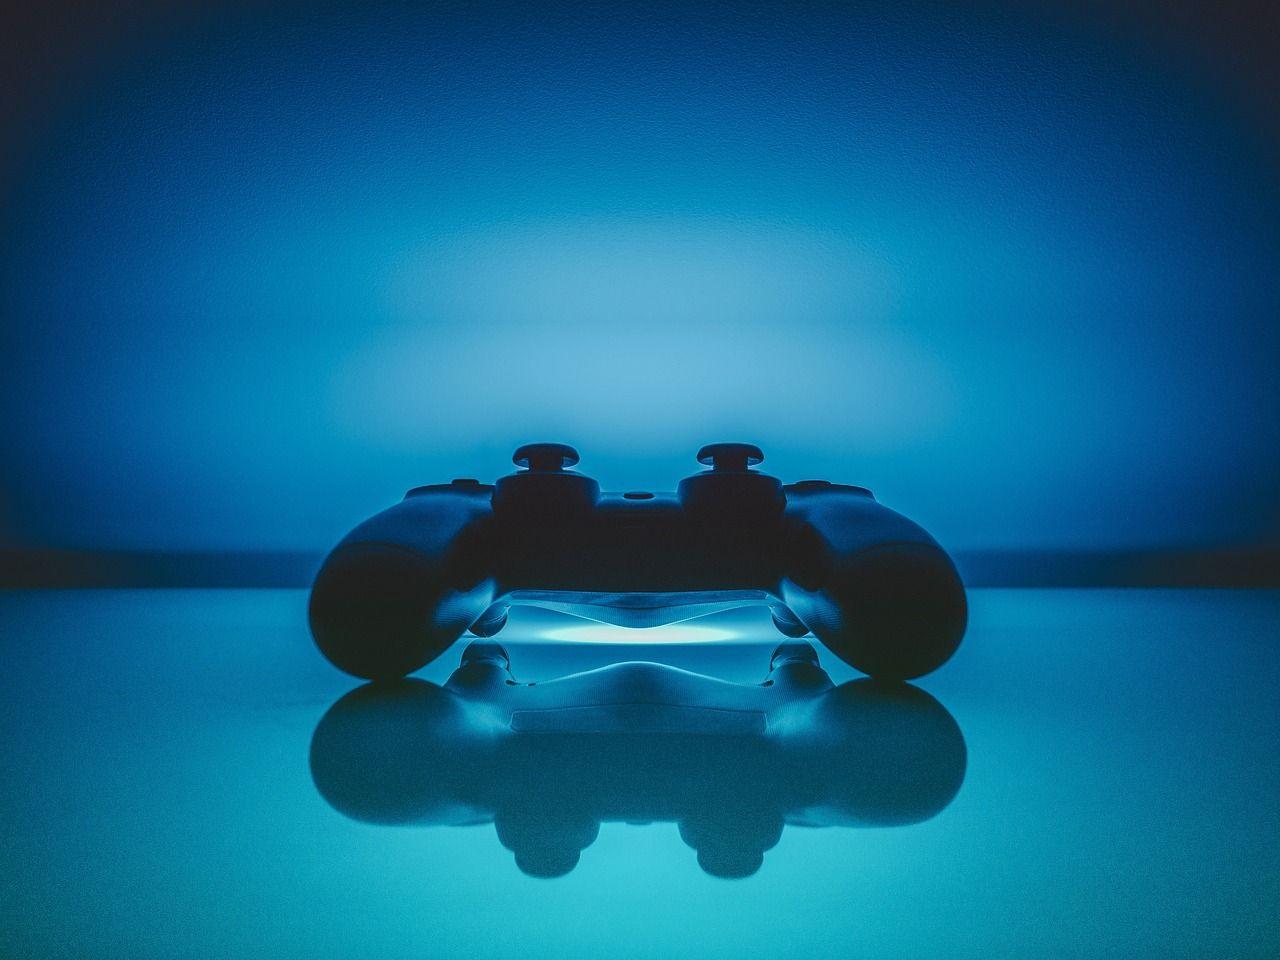 Online purchase vs. physical games: Advantages and disadvantages of gaming platforms like Steam